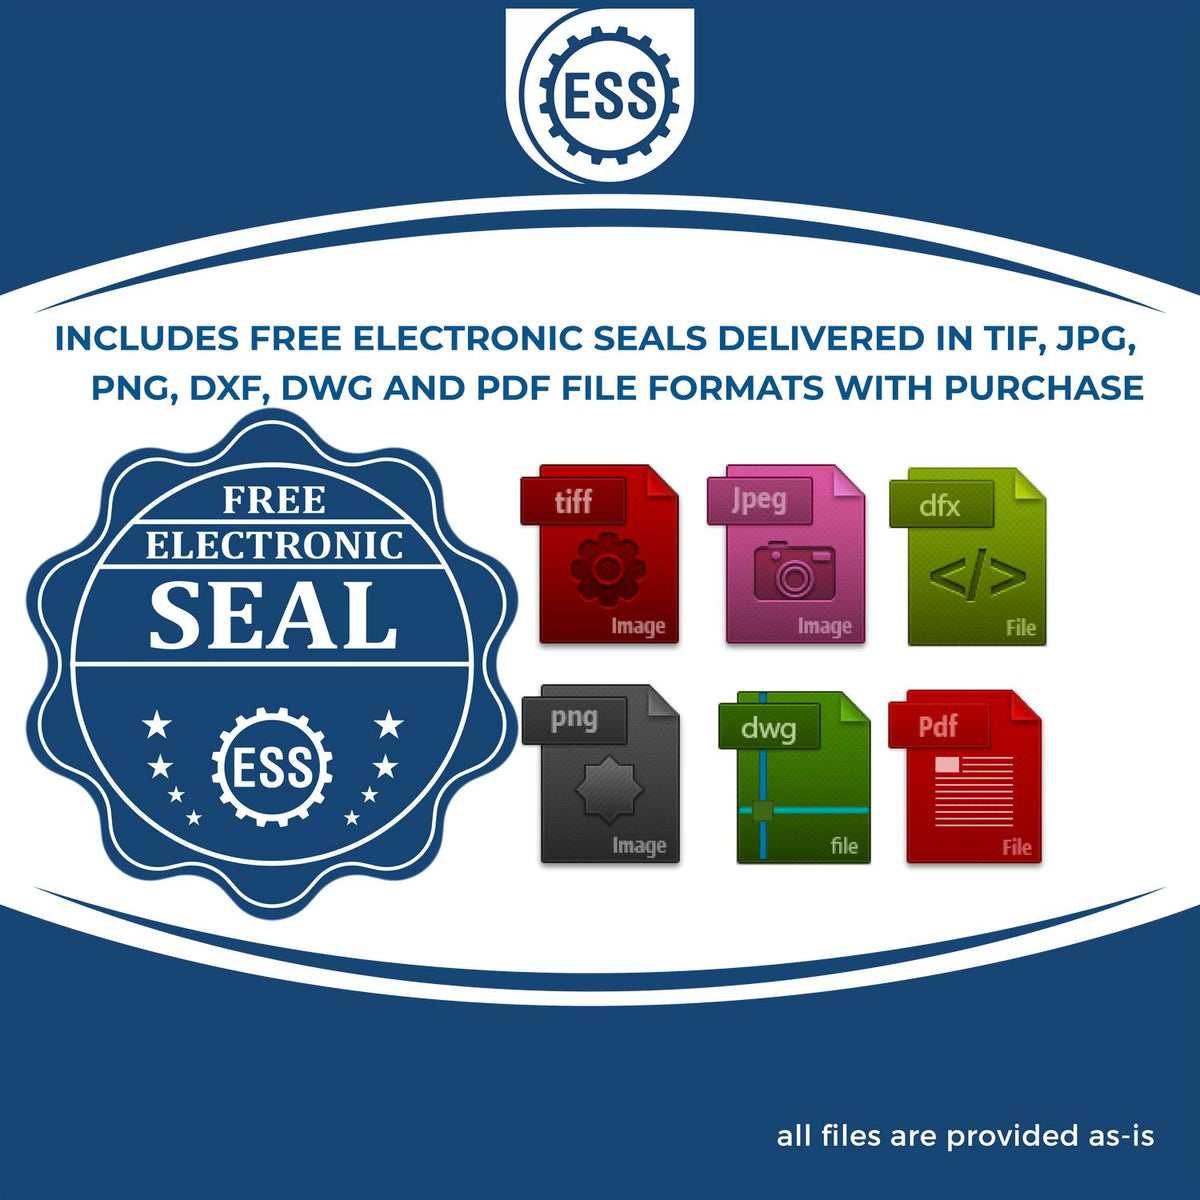 An infographic for the free electronic seal for the Long Reach Virginia PE Seal illustrating the different file type icons such as DXF, DWG, TIF, JPG and PNG.